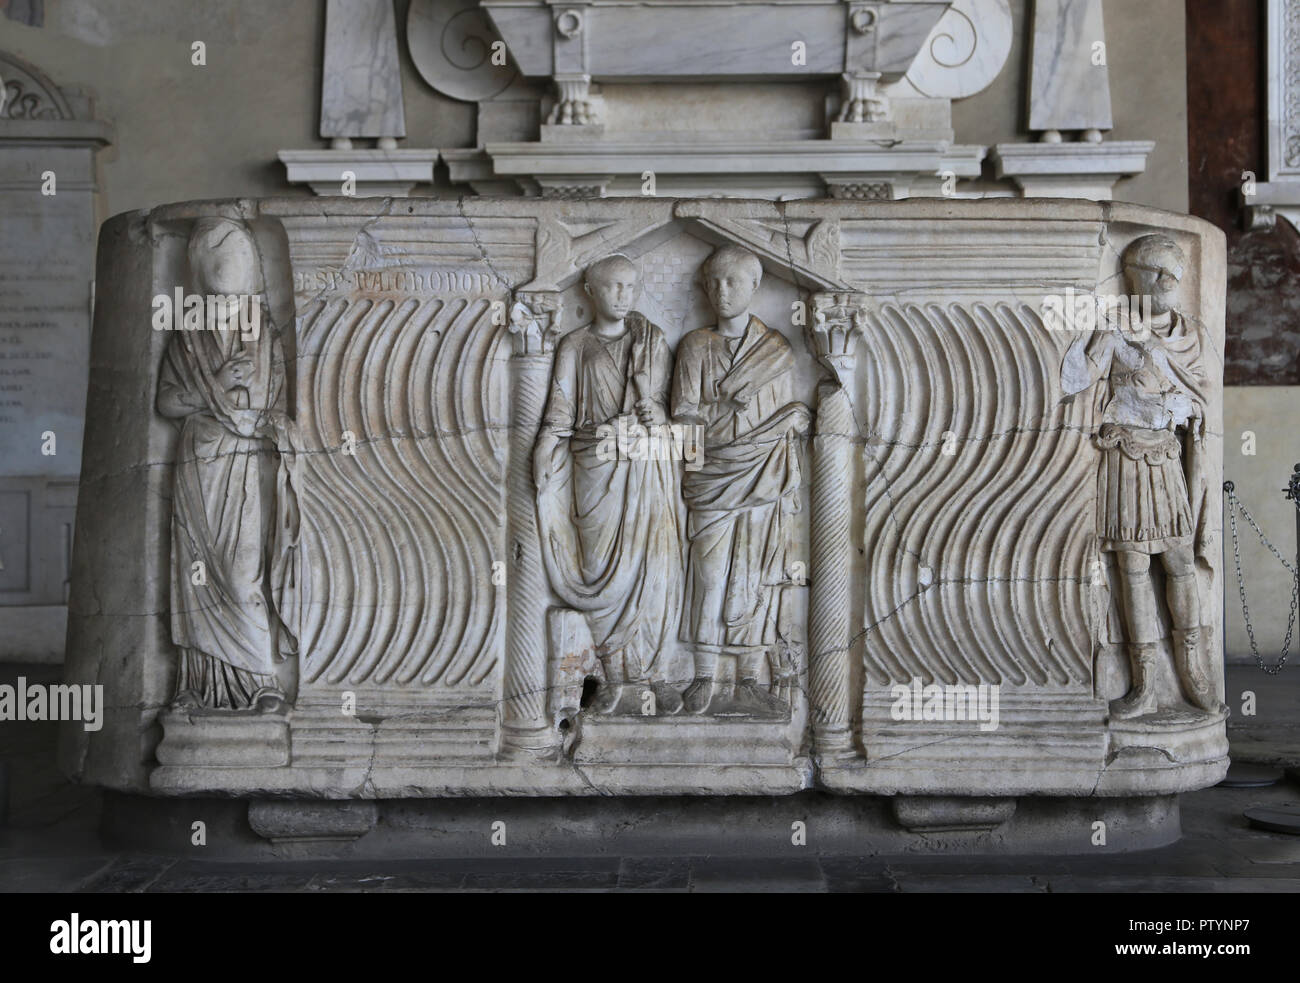 Roman sarcophagus. Strigilated ornament, portraits of the deceased in an aedicule. 220-250 CE. Camposanto. Pisa. Italy. Stock Photo